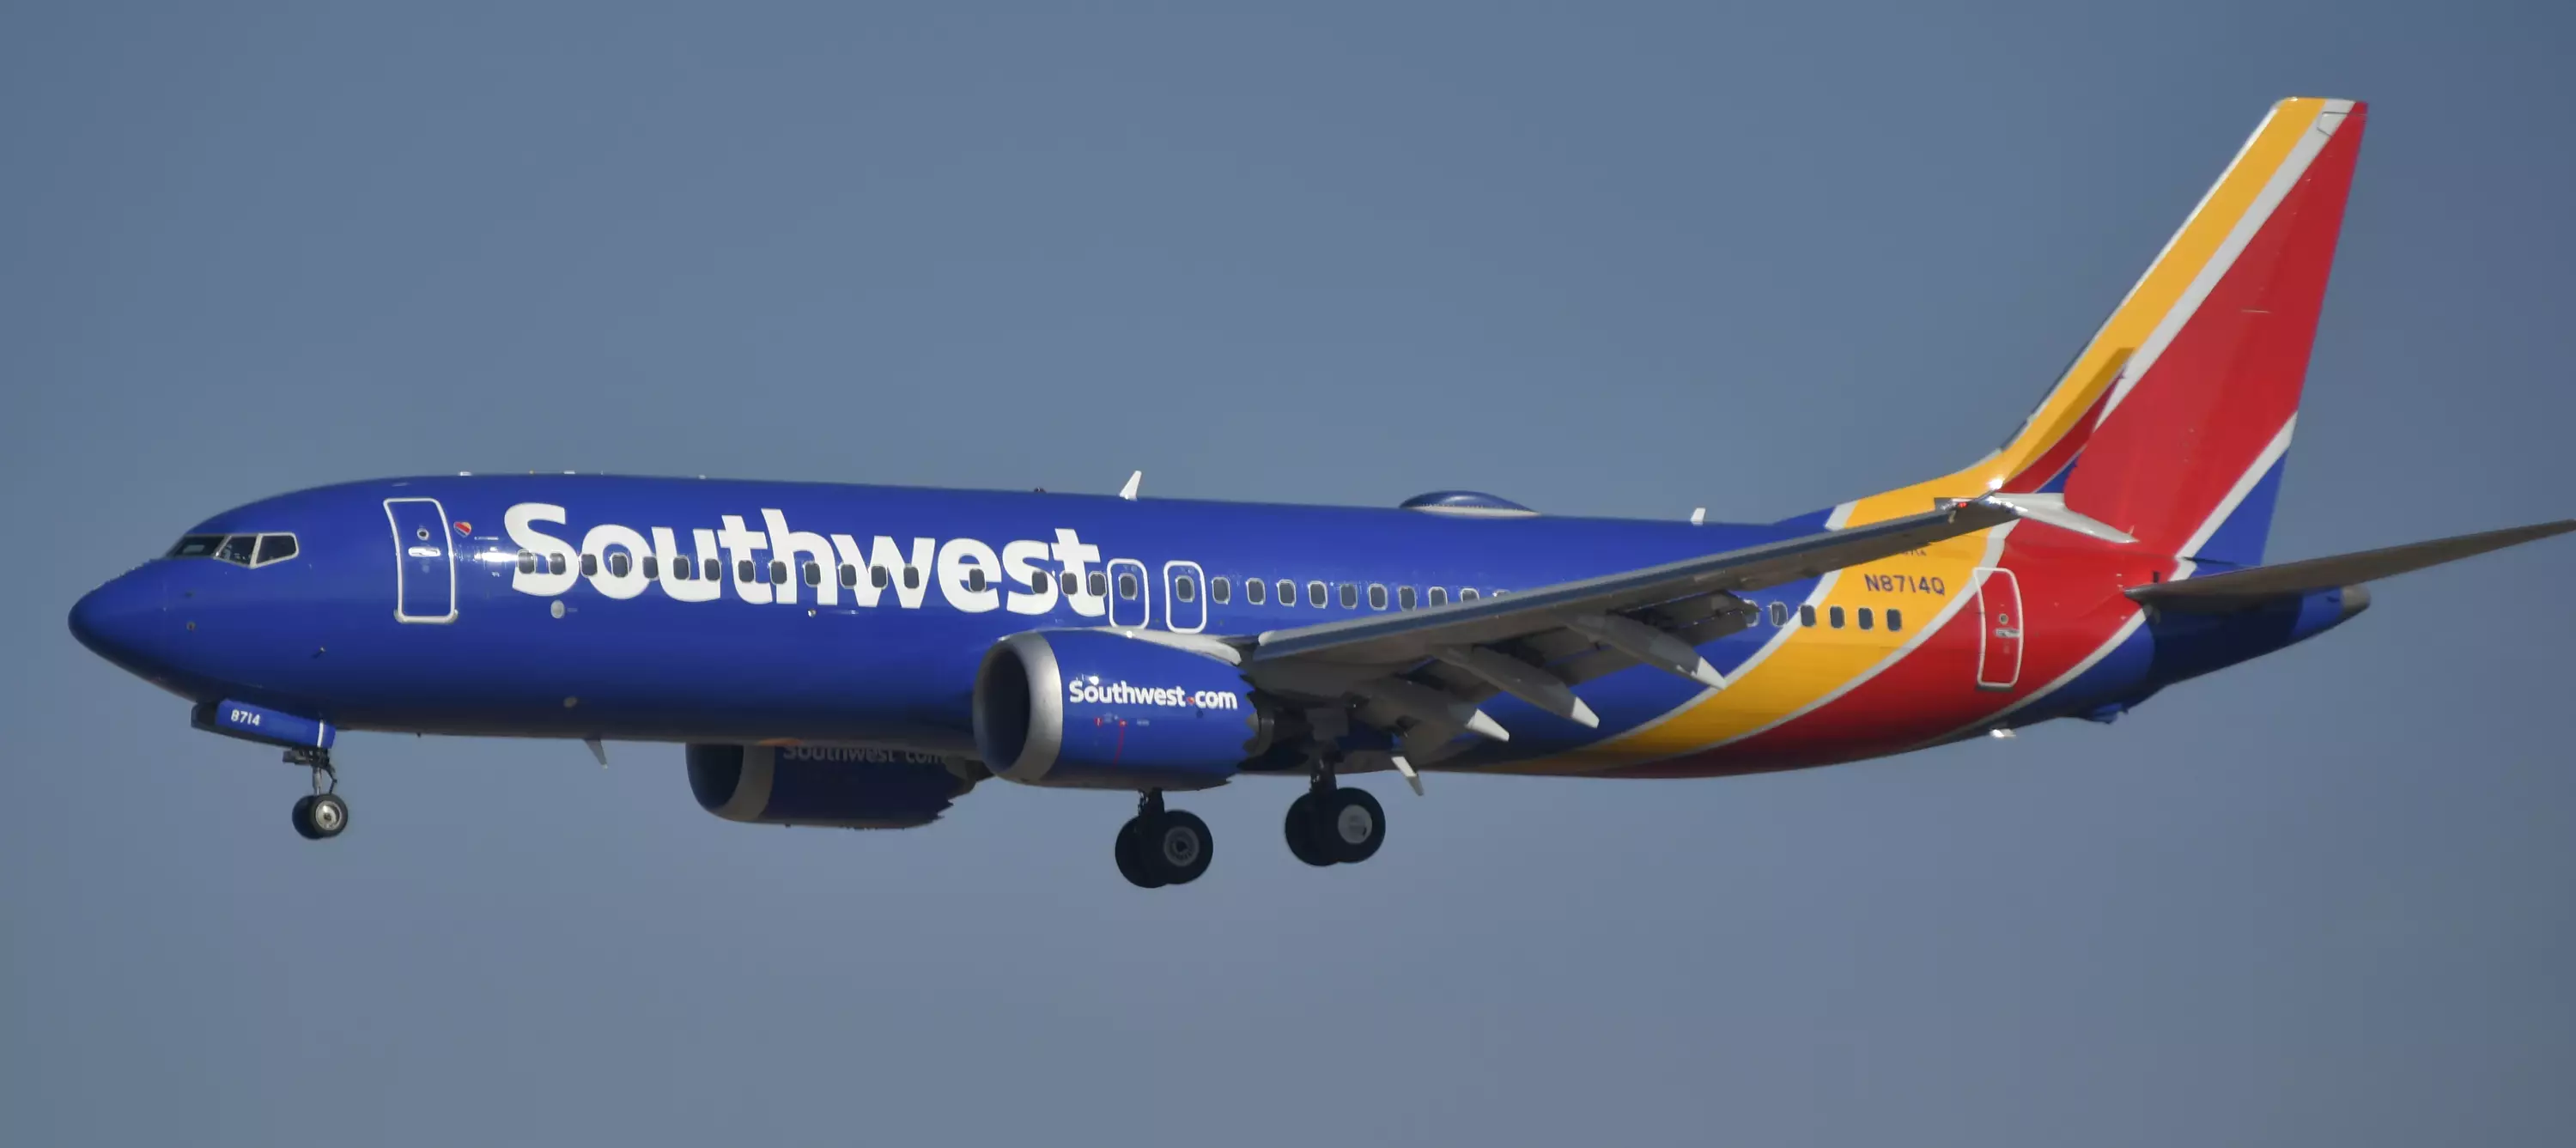 Southwest Airlines has issued a statement.